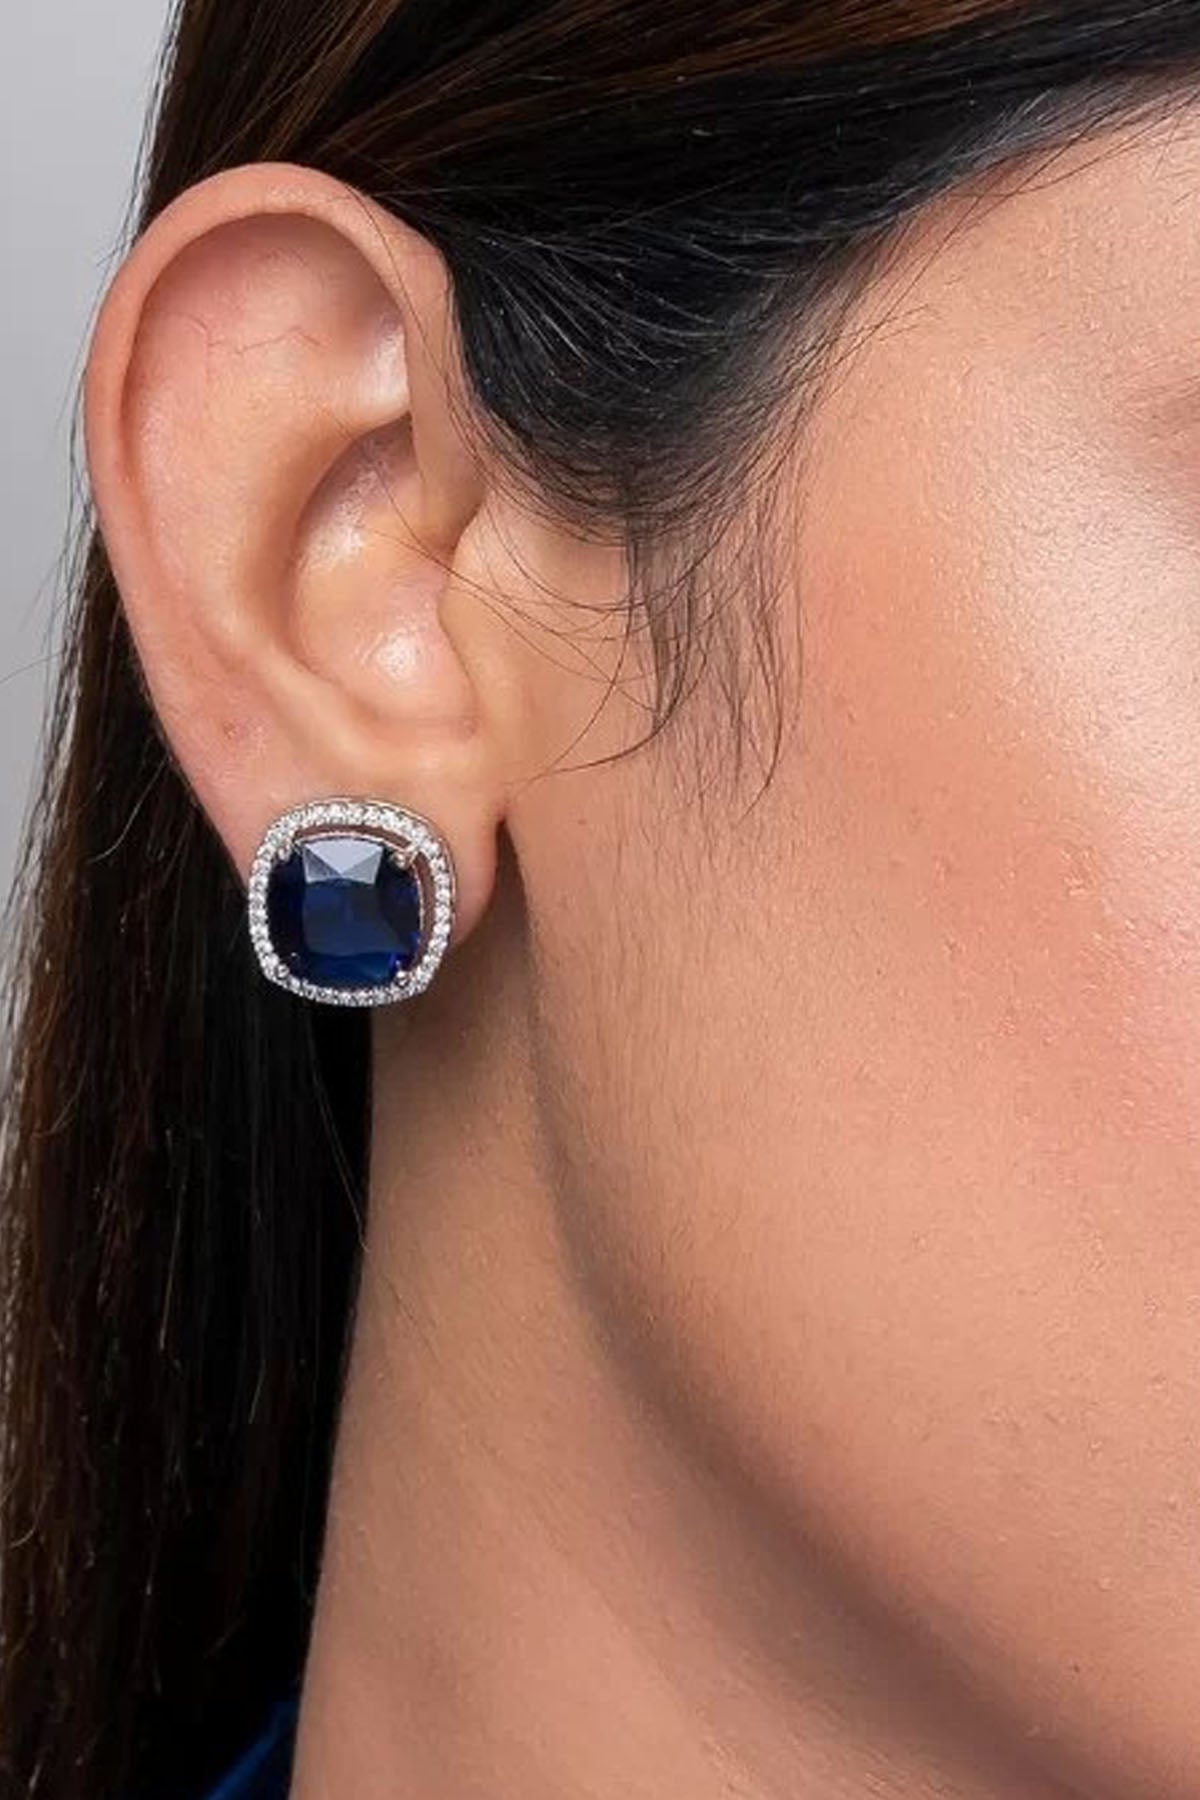 Blue Square American Diamond Earrings of Brand Putstyle Available online at ScrollnShops